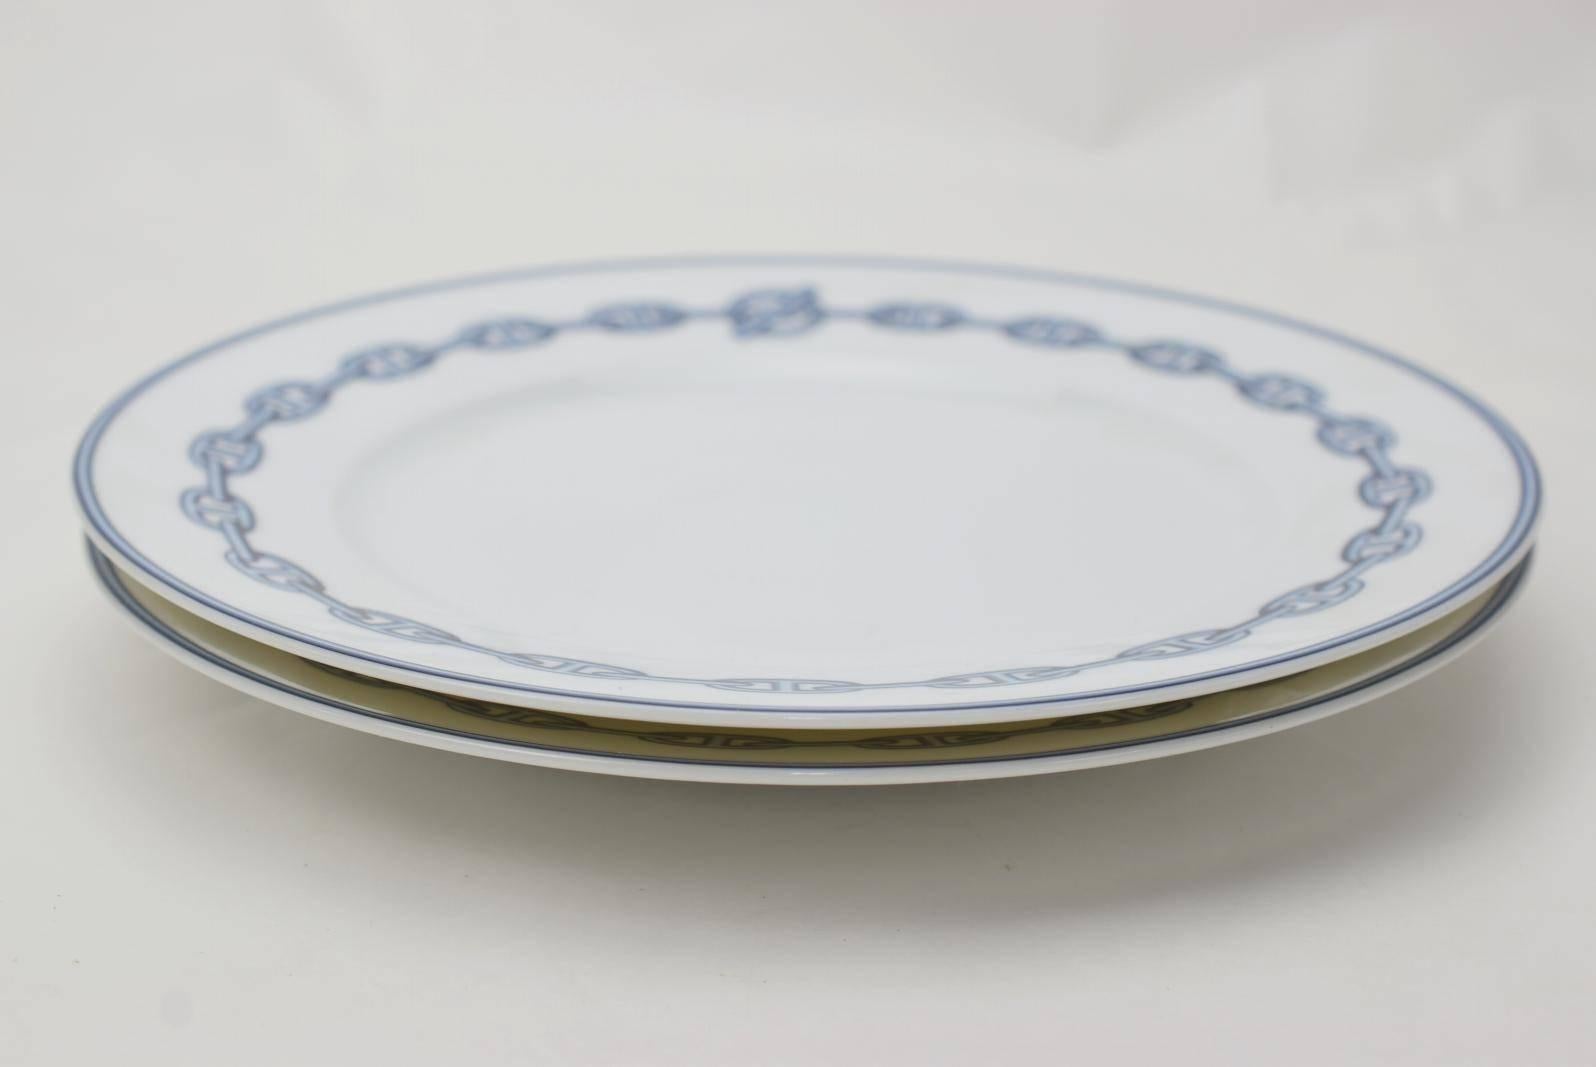 CURATOR'S NOTES

Porcelain
Made in France
Set includes two plates total
Size measures ~8.85"
Includes original Hermes box